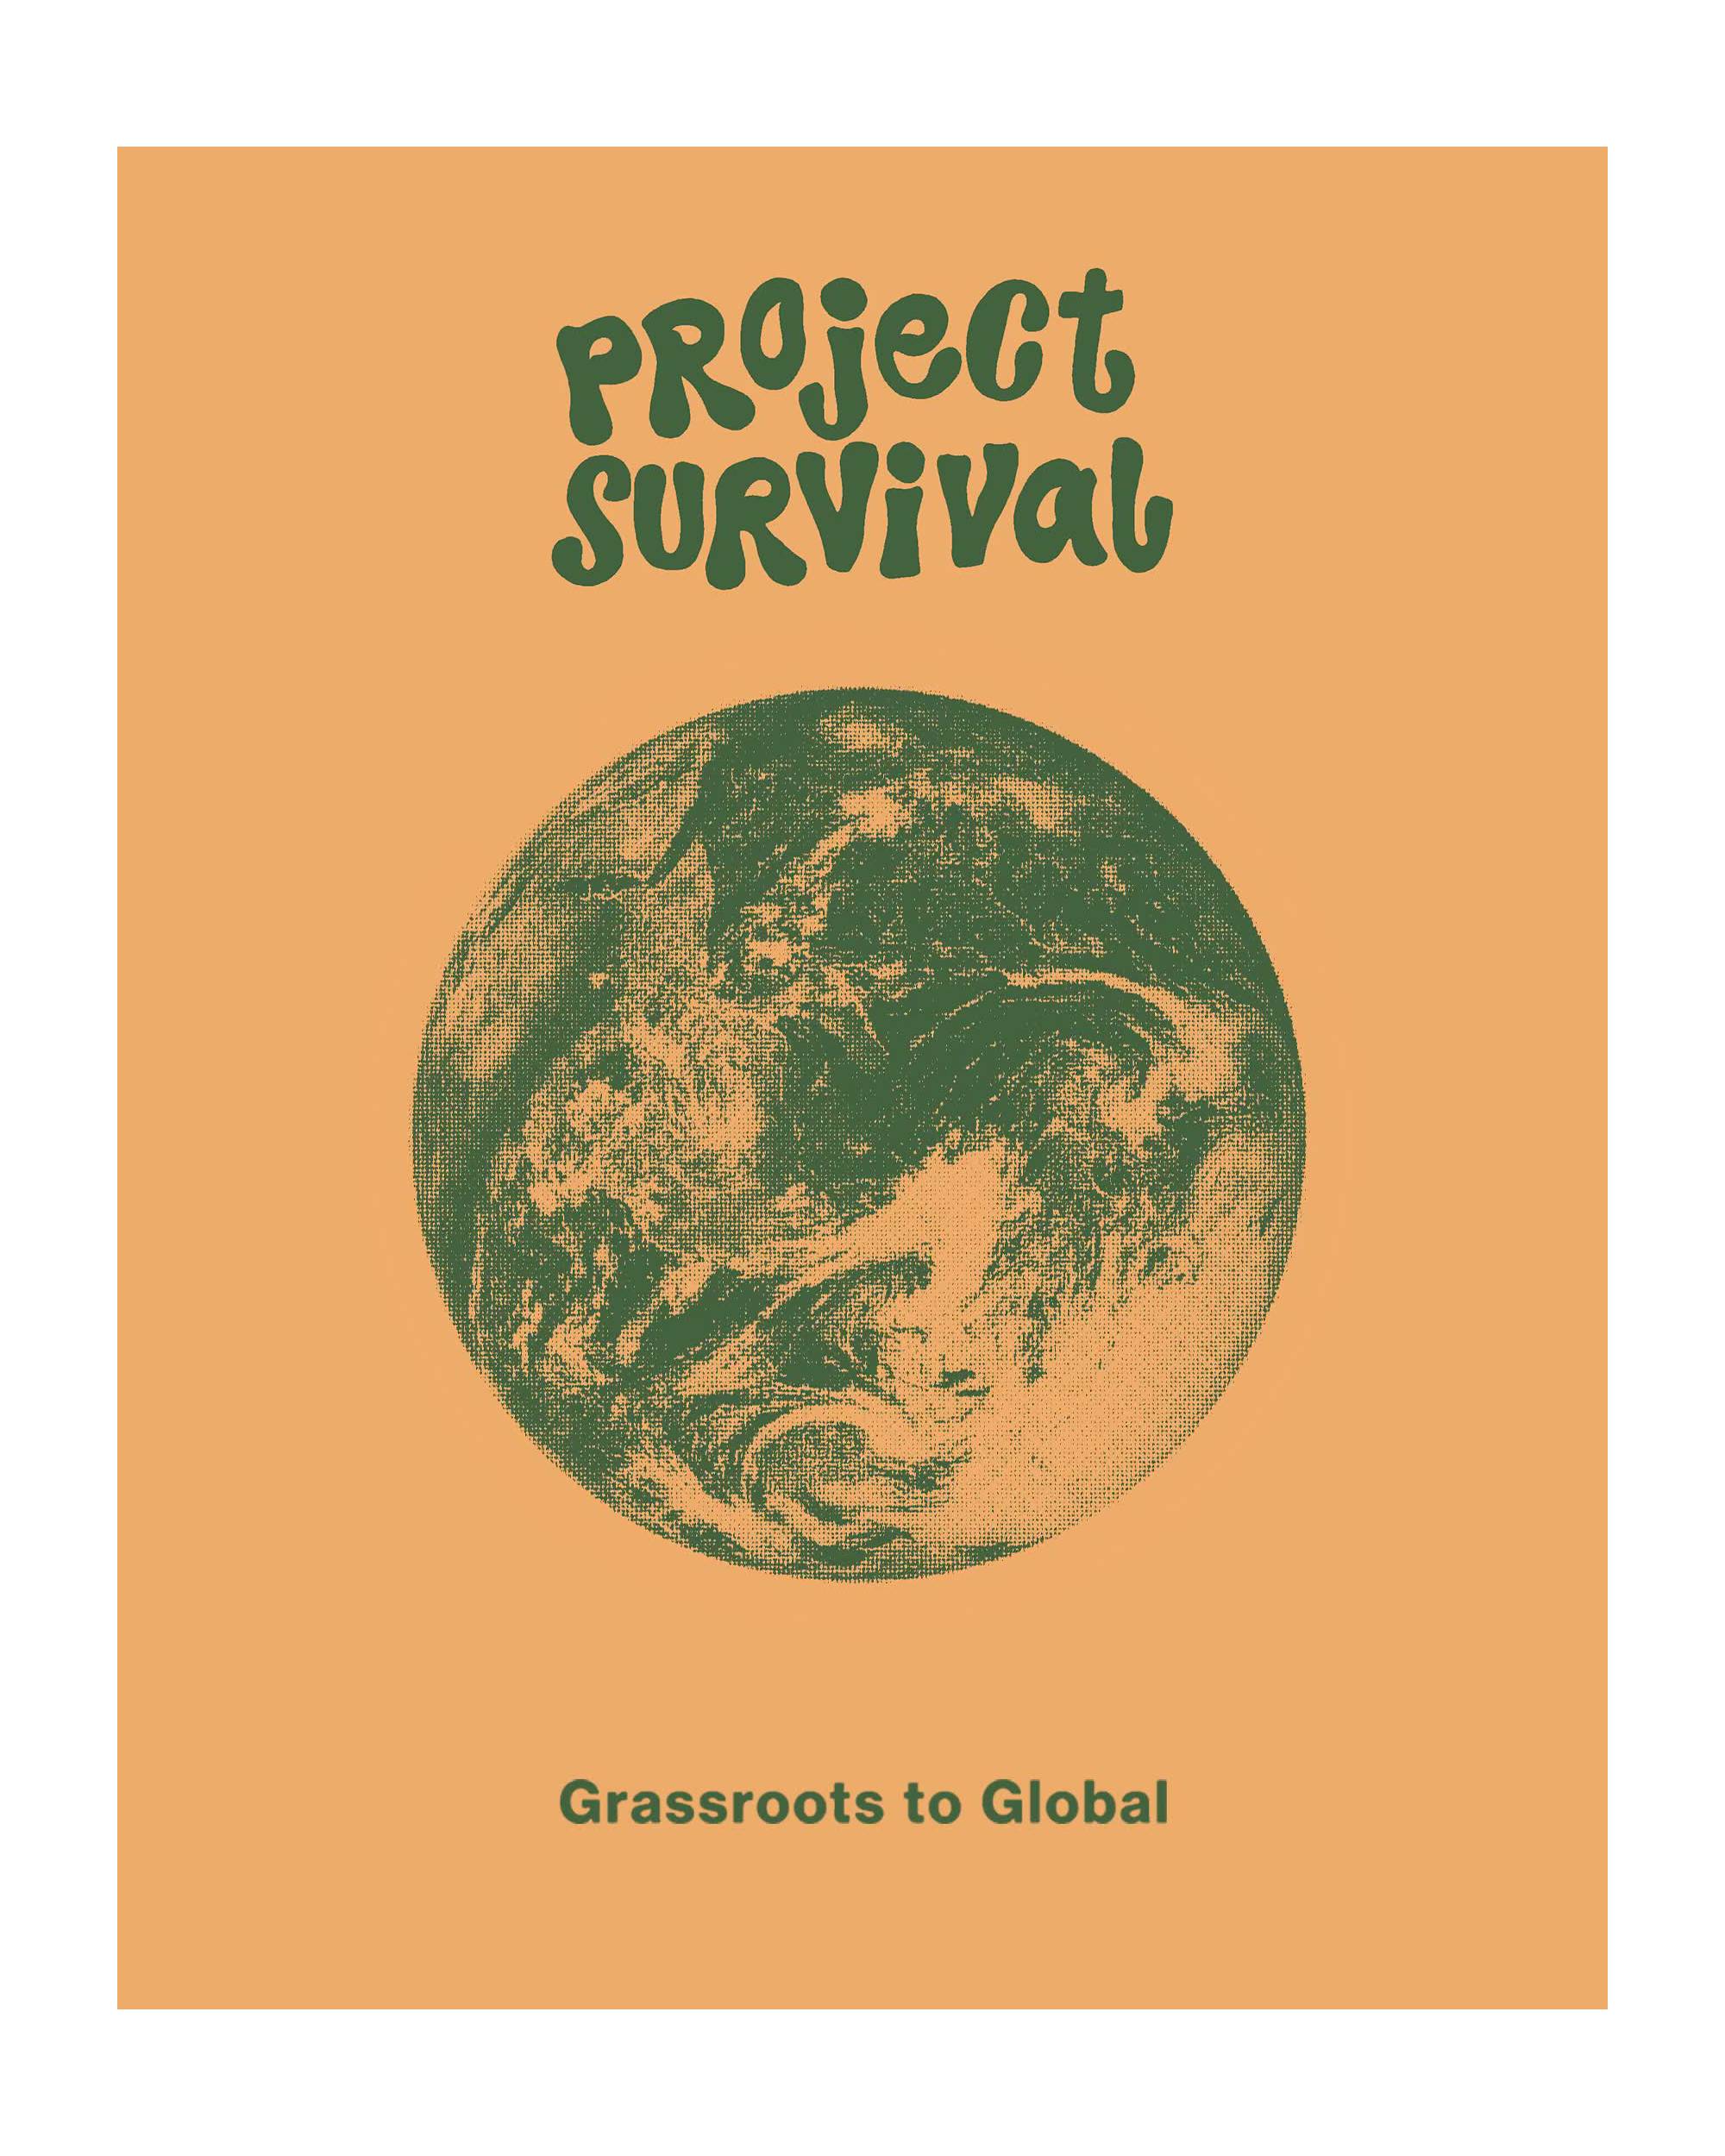 Illustrative Globe Spinning with Project Survival type at top